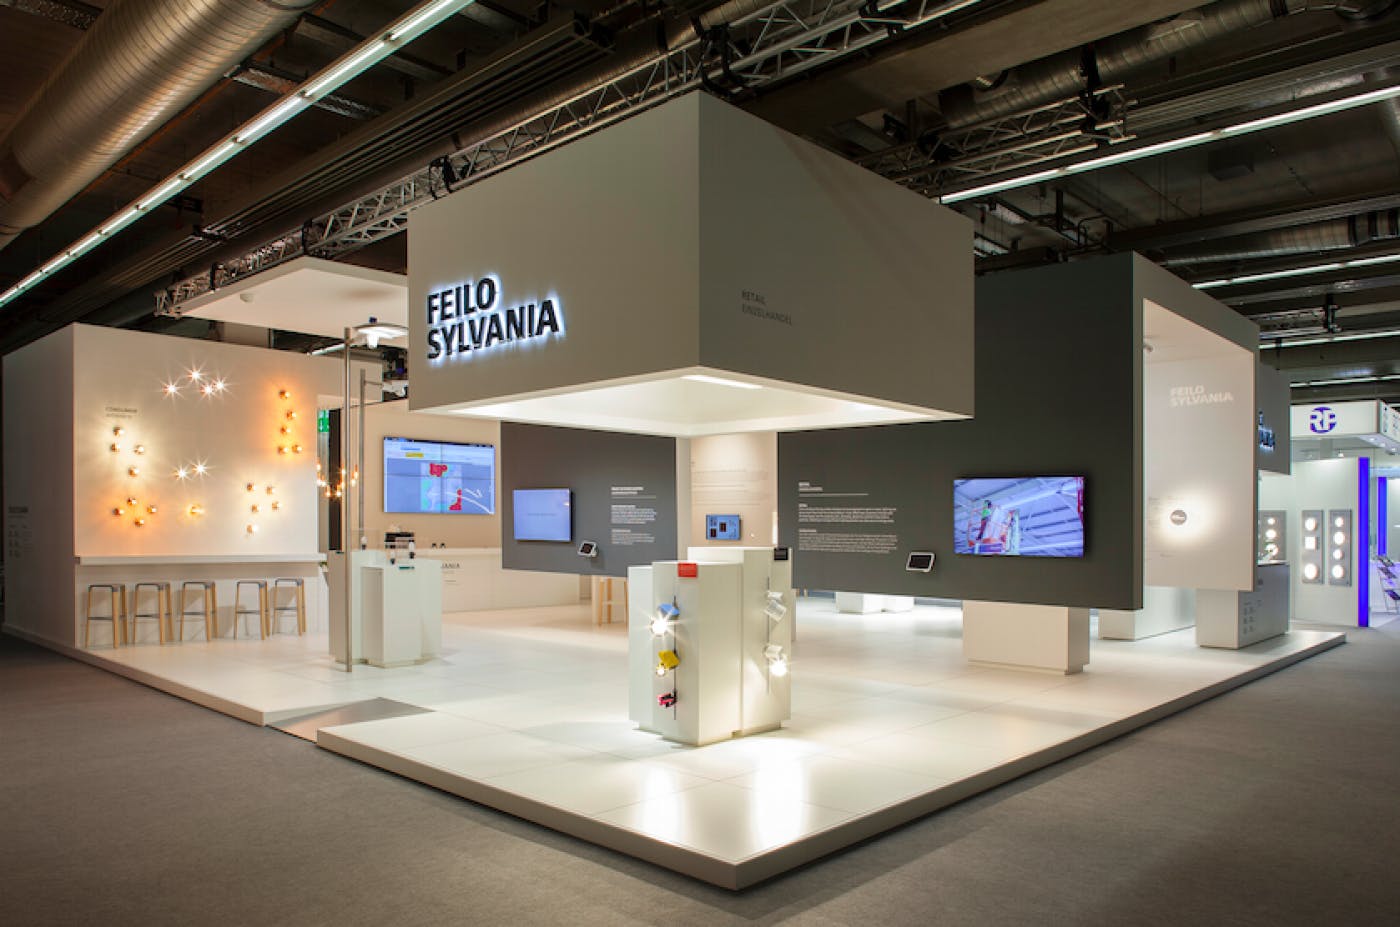 ondsindet Acquiesce mord How Architectural Lighting Solutions Company Feilo Sylvania Attracted over  5000 Visitors to Their Exhibition Stand Using ScreenCloud - ScreenCloud